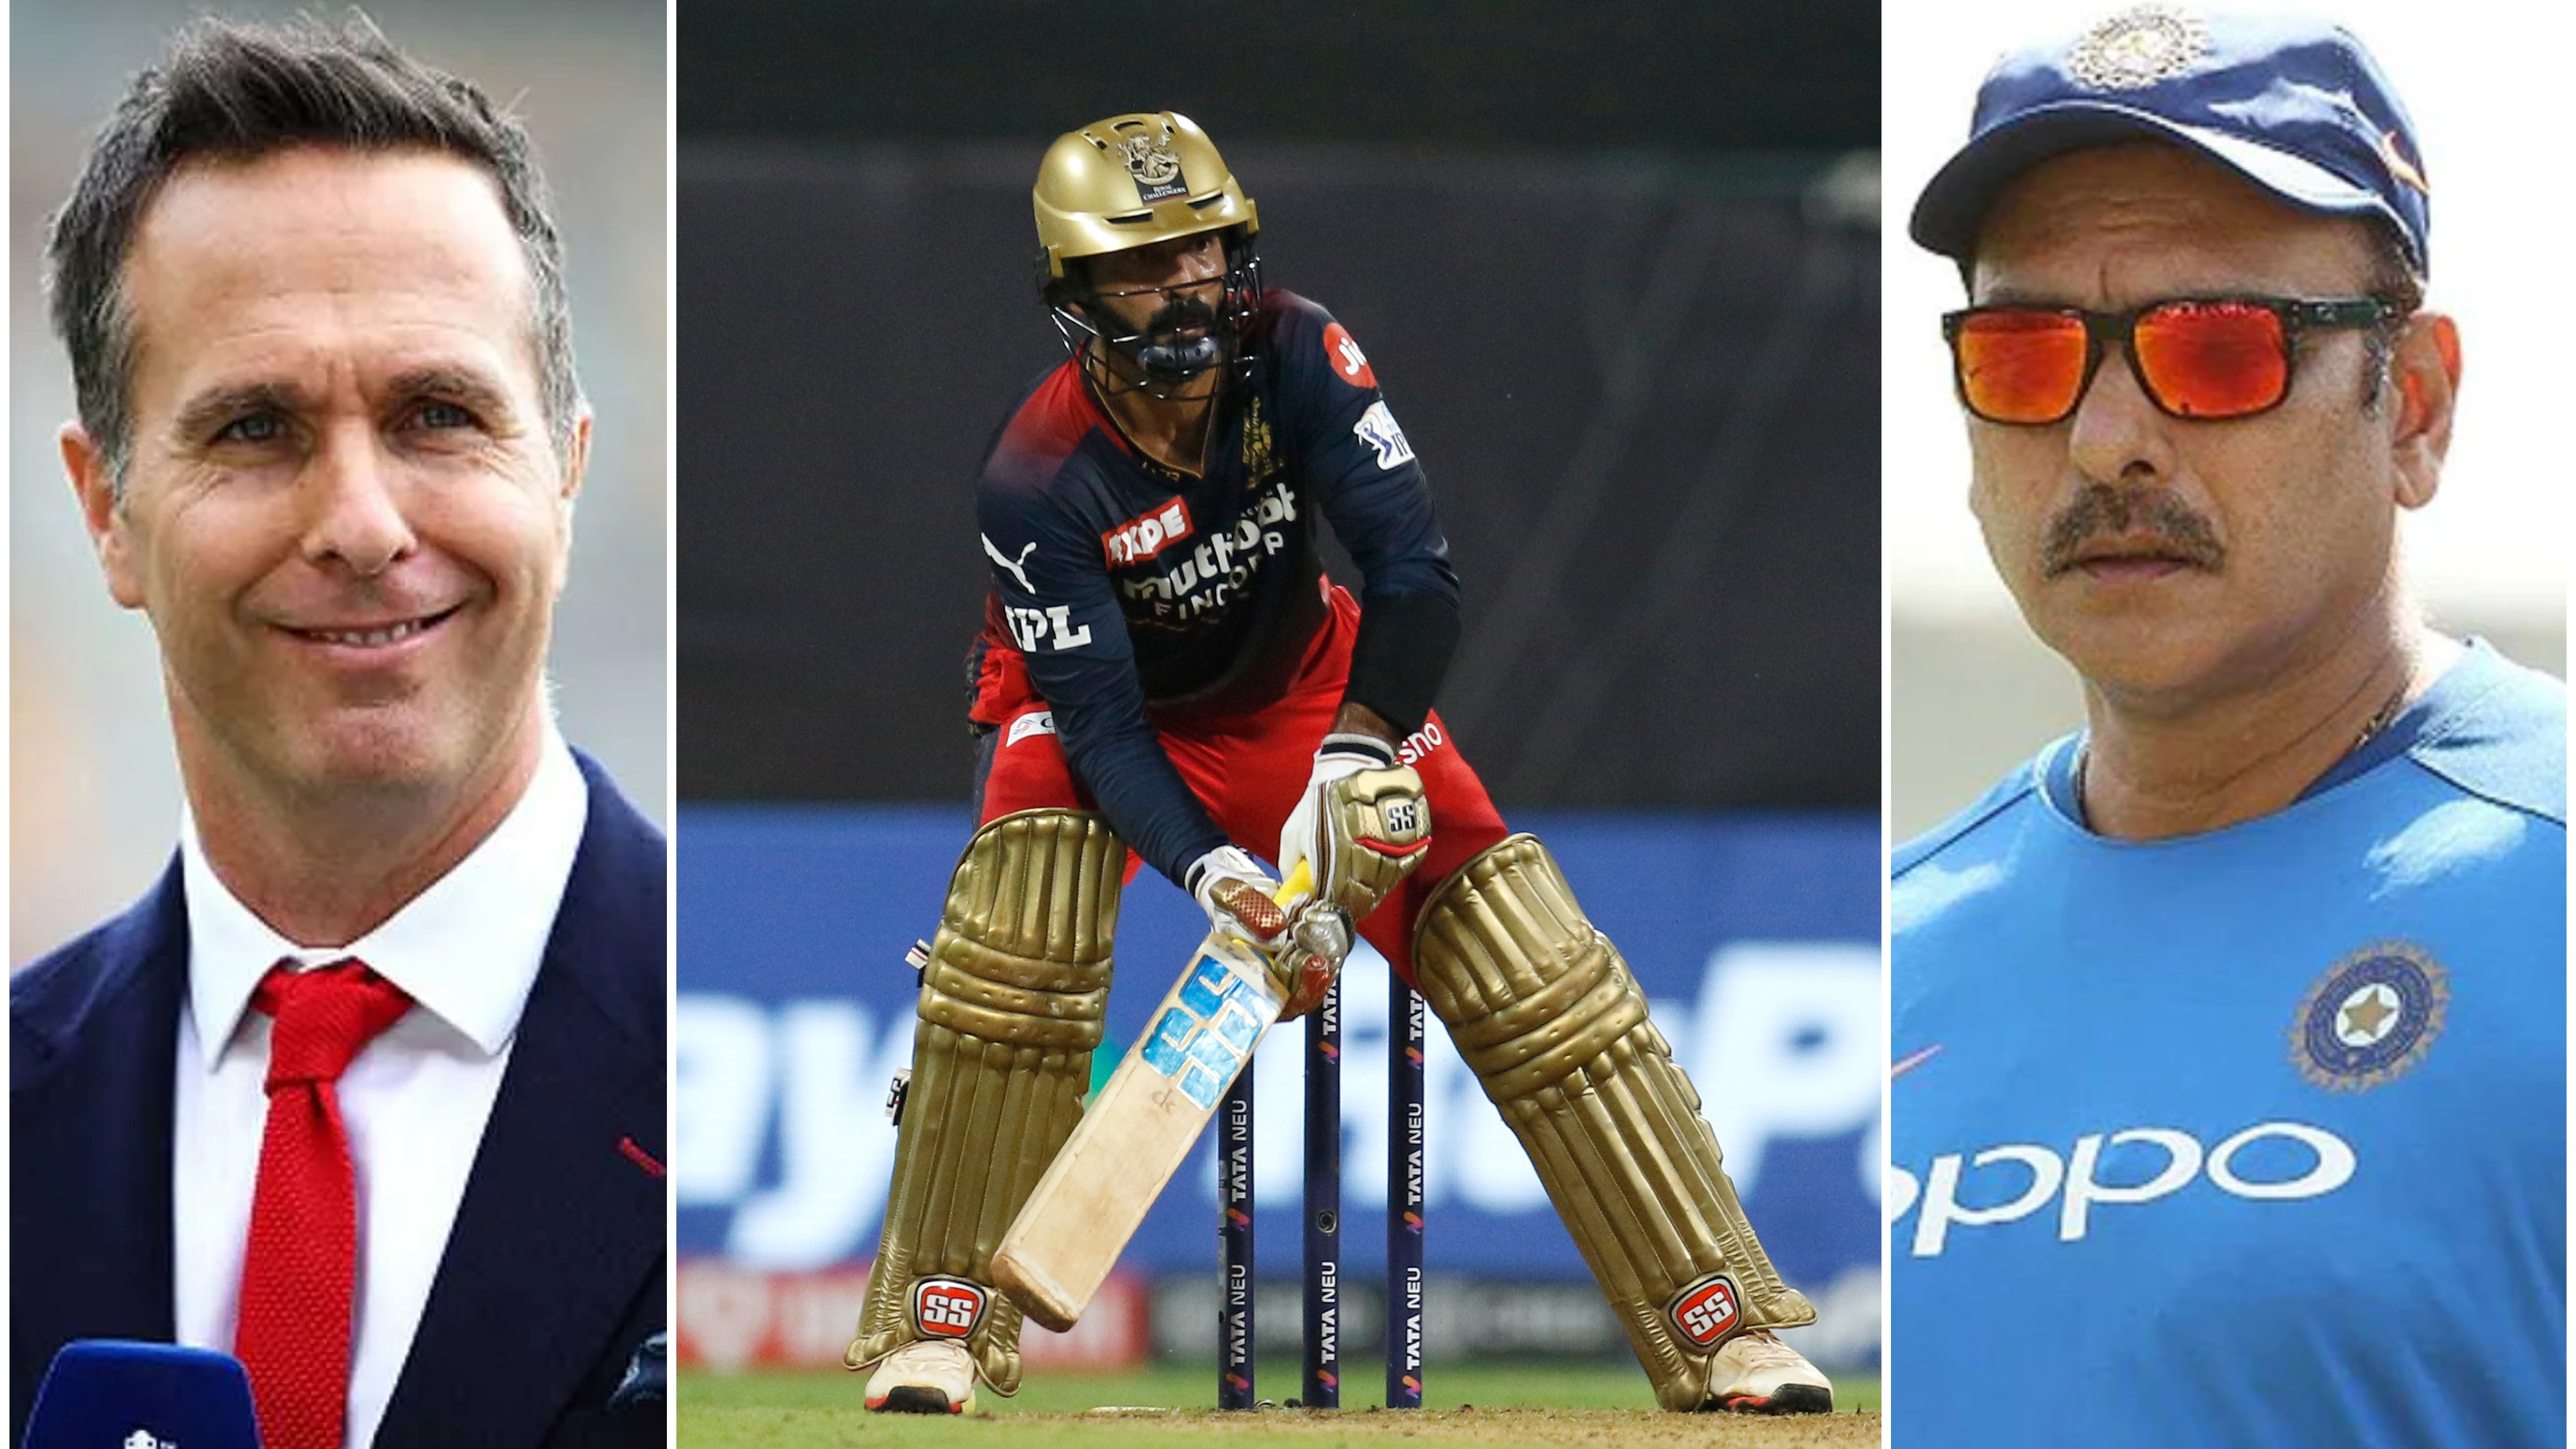 IPL 2022: Cricket fraternity lauds Dinesh Karthik as his whirlwind 66* takes RCB to 189/5 against DC